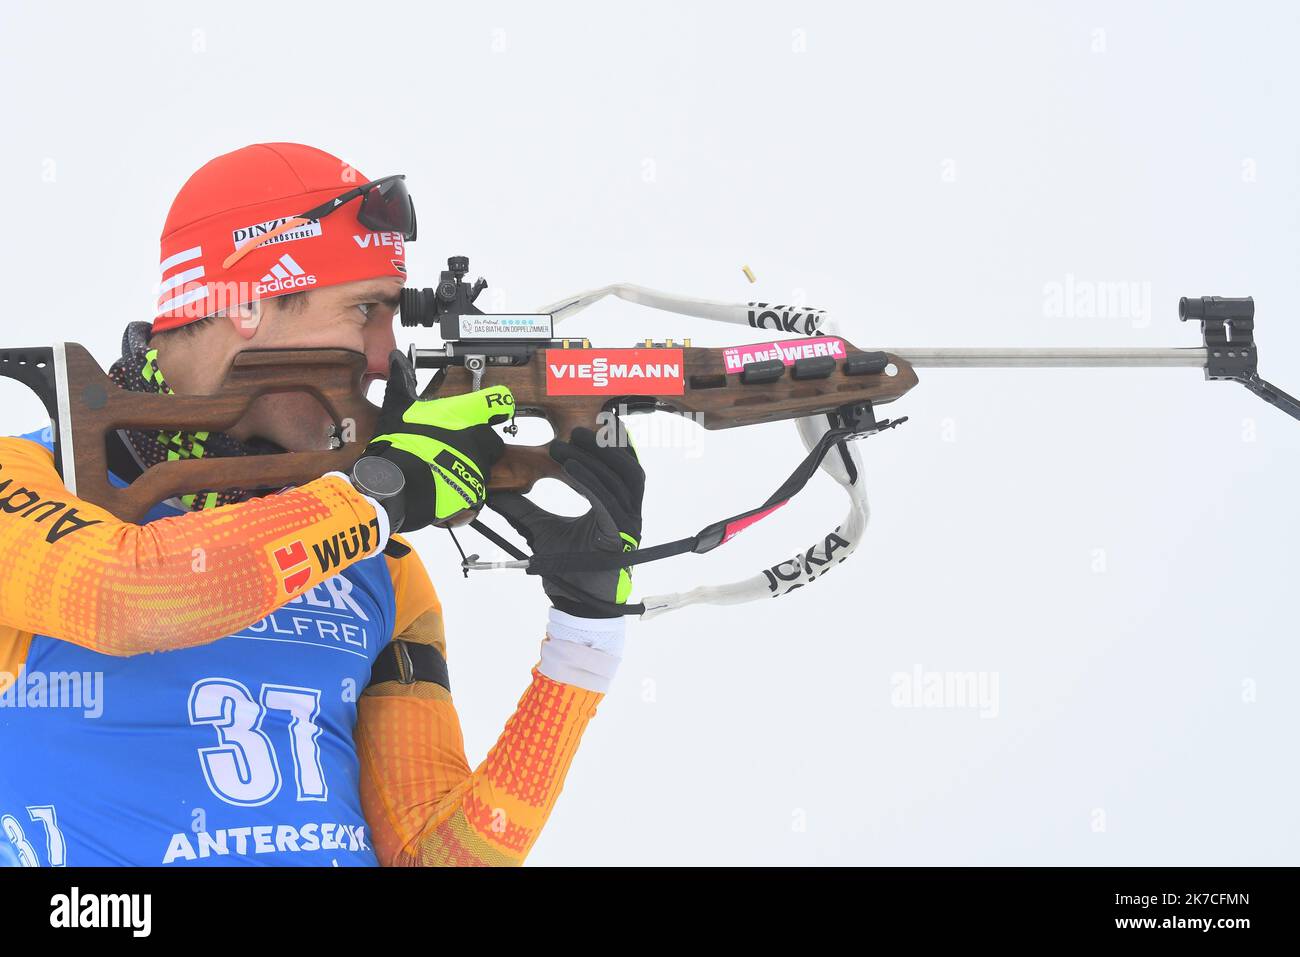 ©Andre Huber/MAXPPP ; 22/01/2021, Anterselva, Antholz - IBU World Cup Biathlon 2020 Anterselva - Antholz Men 15 Km Individual Event in Anterselva, Antholz, Italy on January 22, 2021; Arnd PEIFFER (GER) Â© Andre Huber / Maxppp  Stock Photo